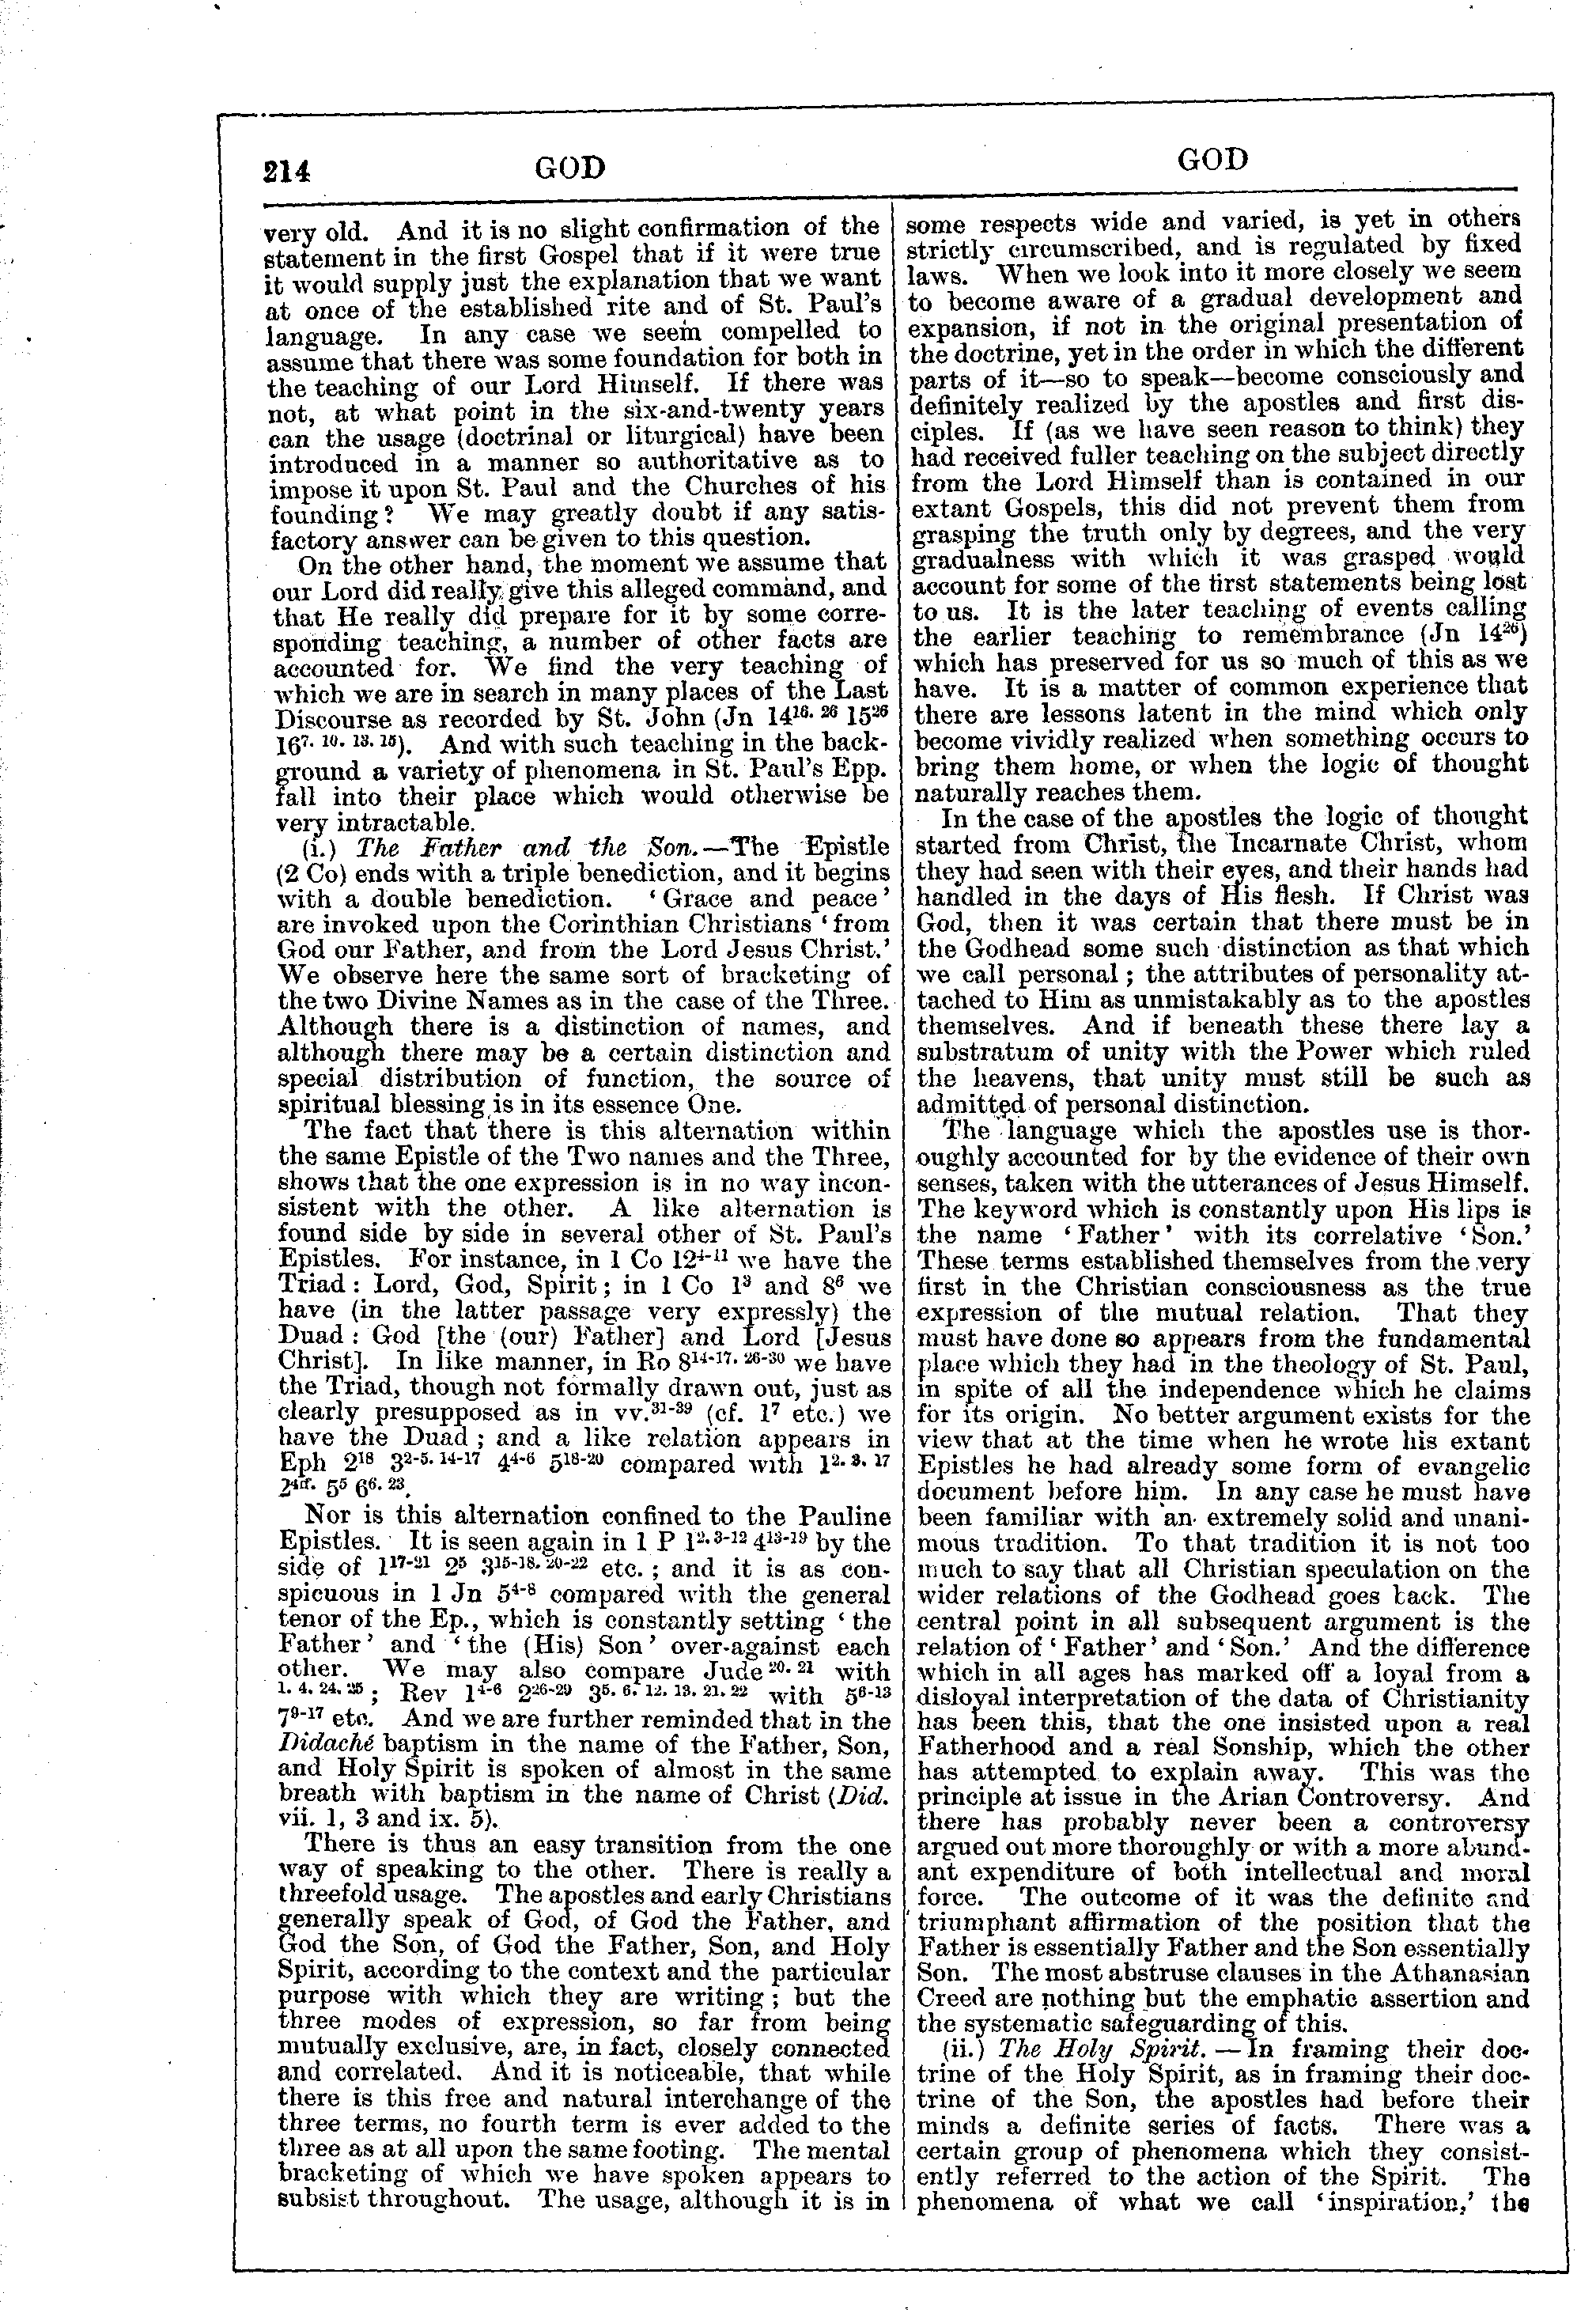 Image of page 214